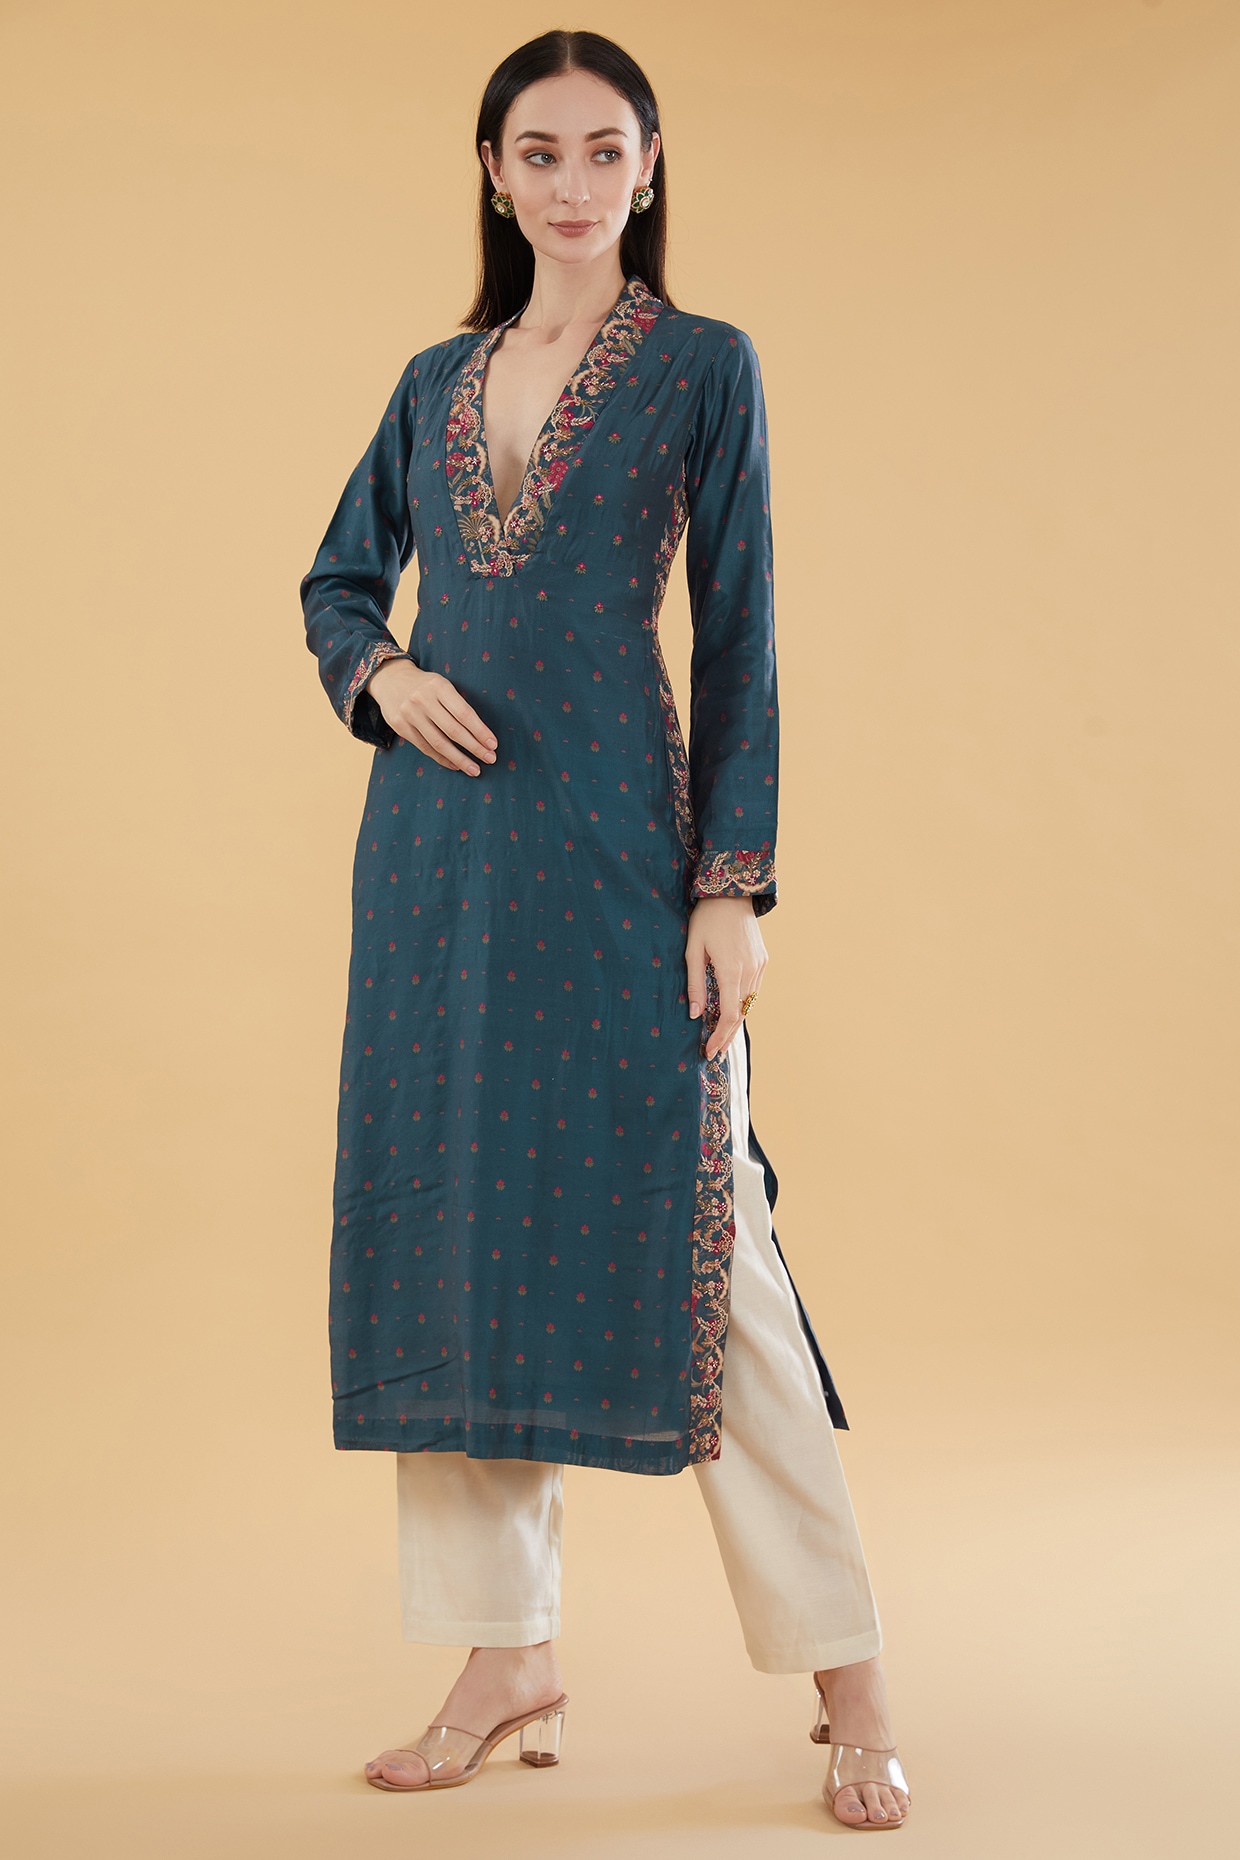 Buy Brown Blended Cotton Suit Party Wear Online at Best Price | Cbazaar